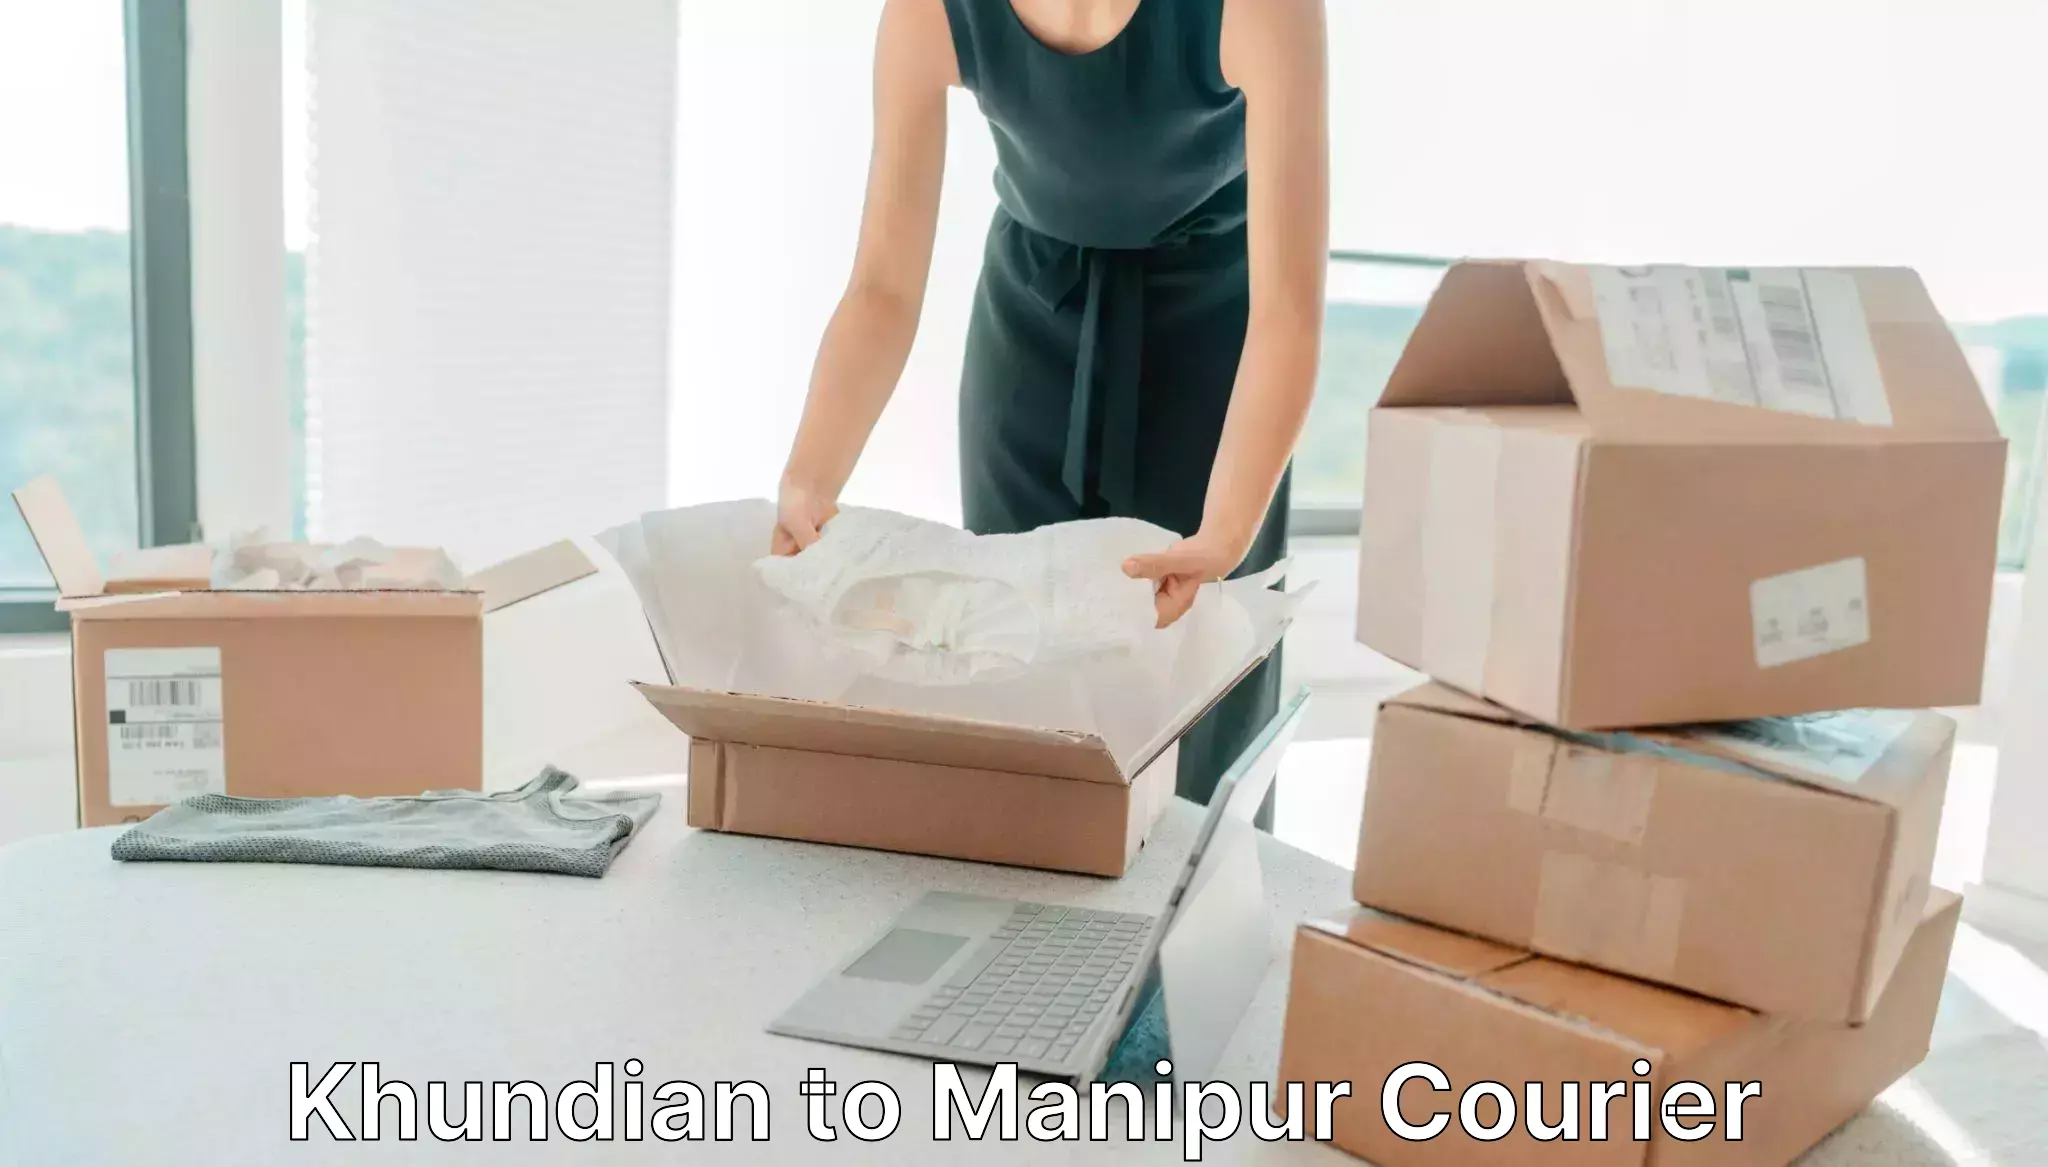 State-of-the-art courier technology in Khundian to Chandel